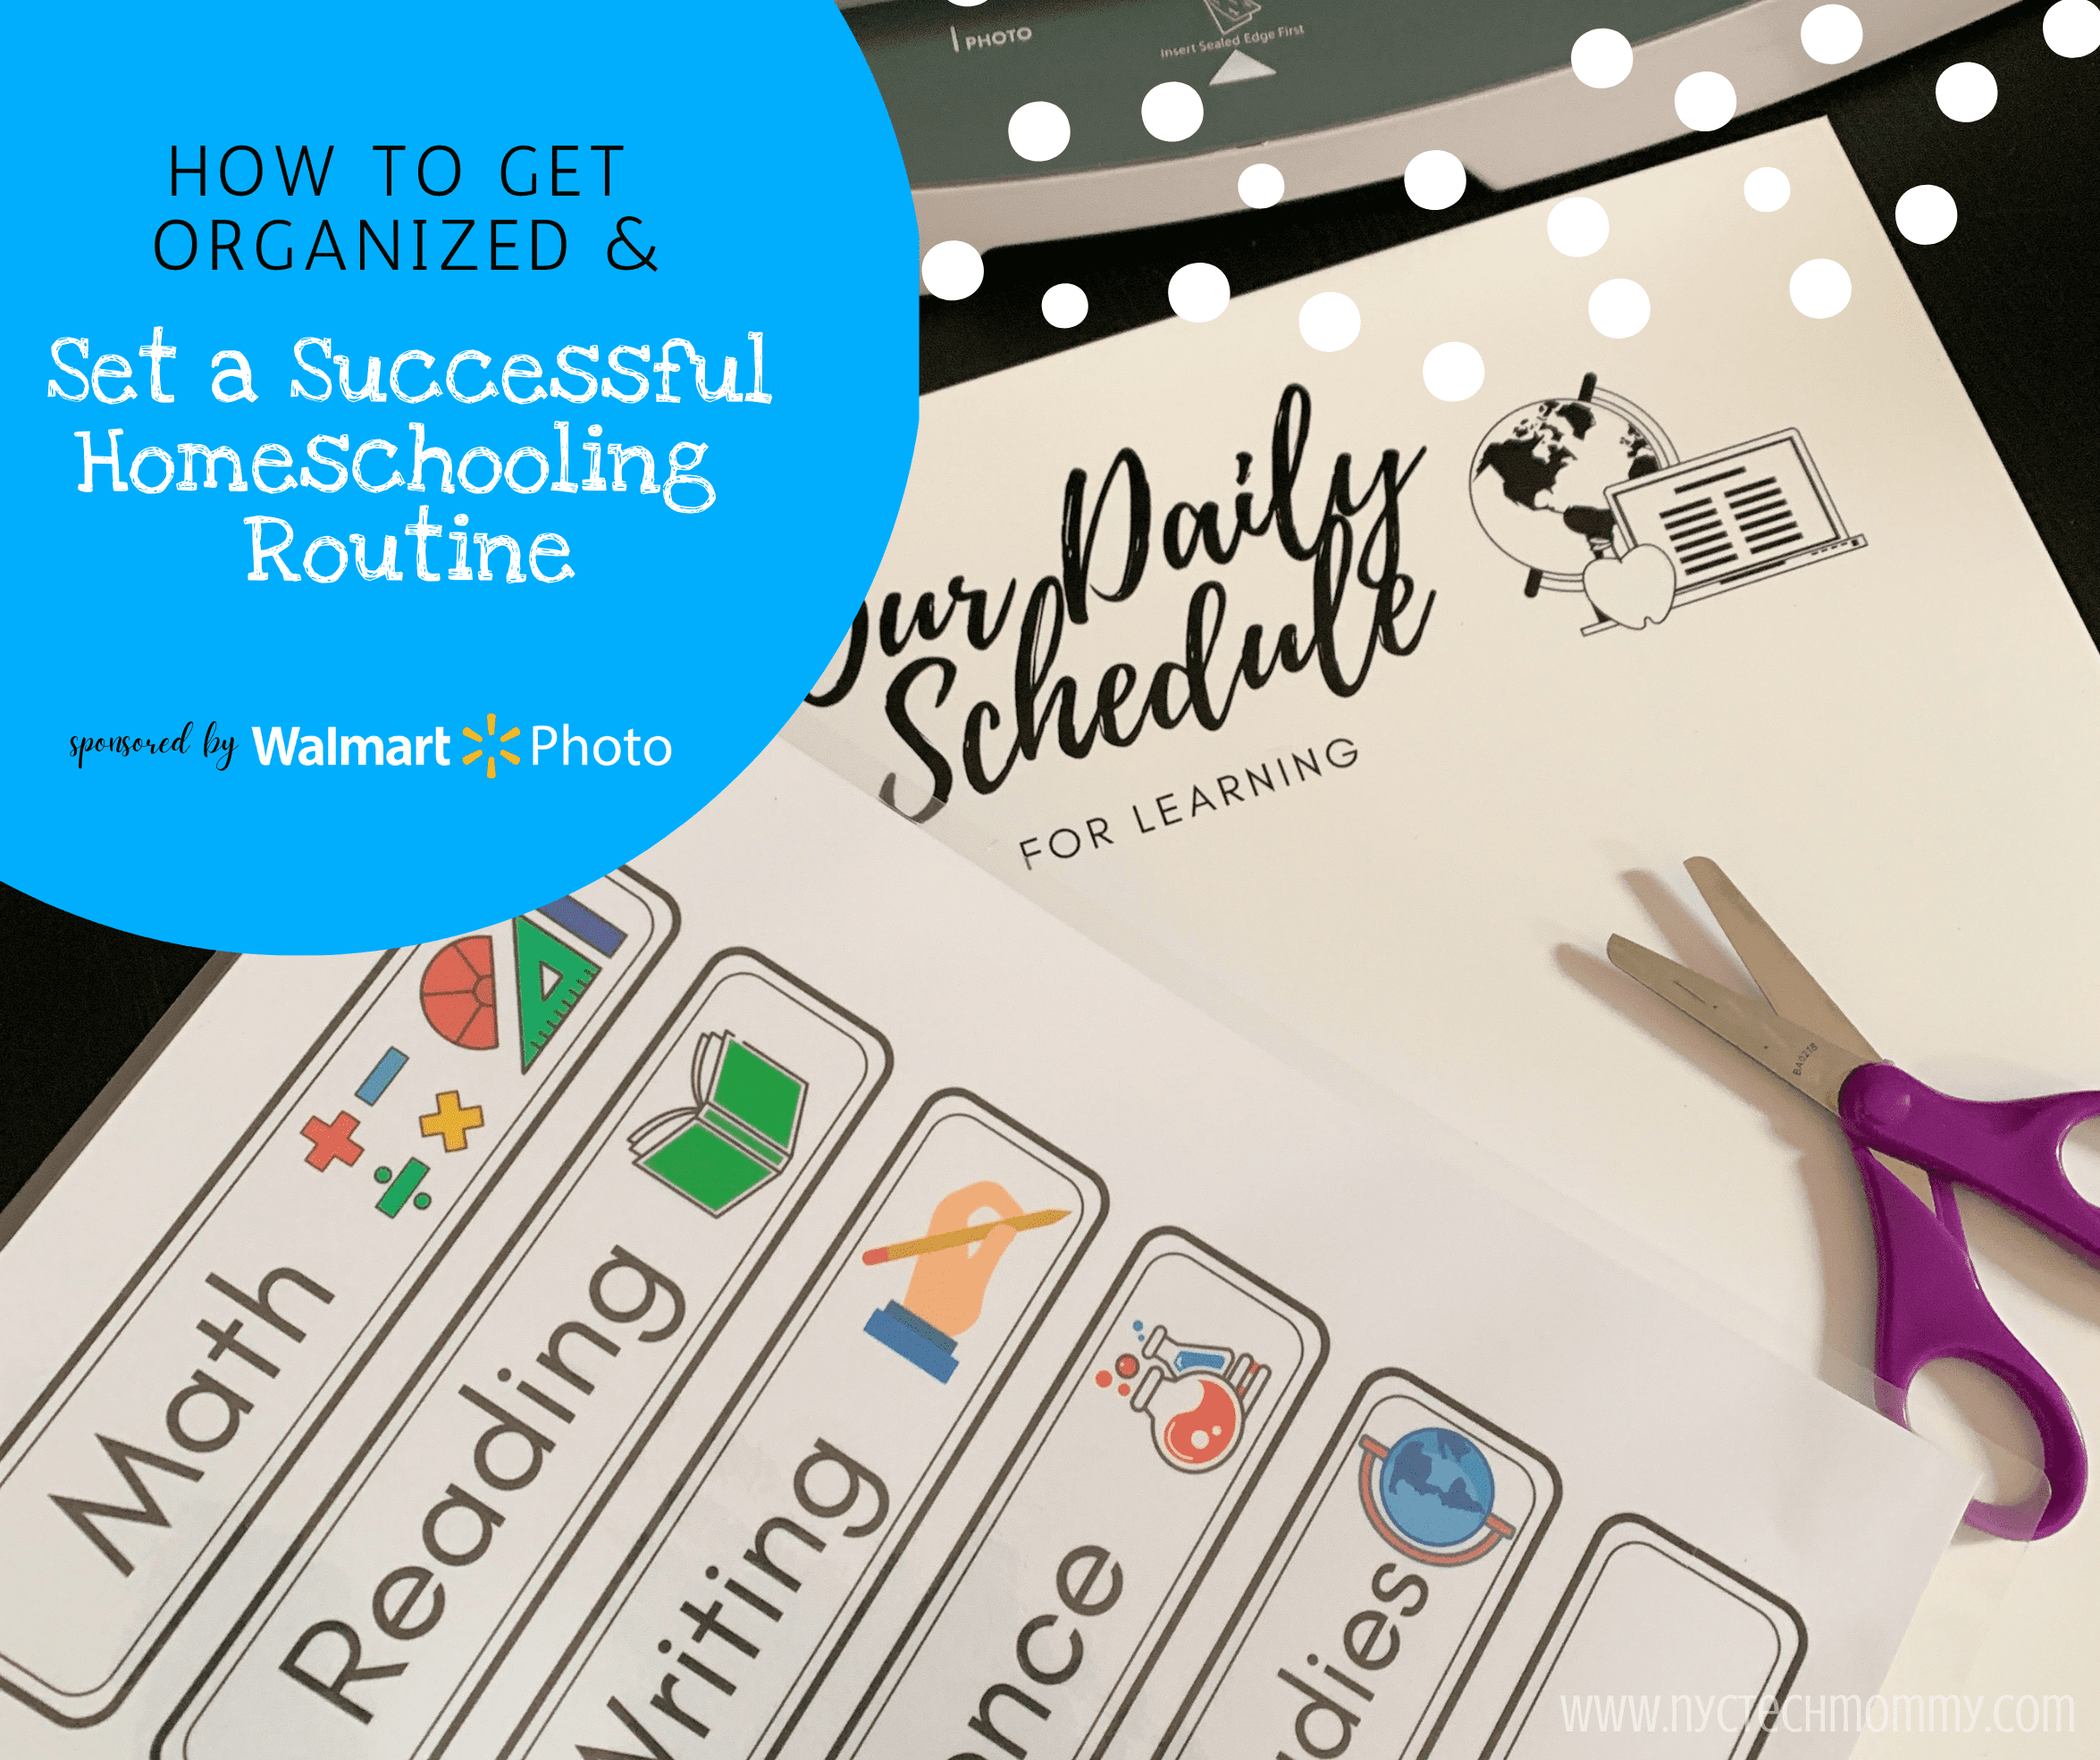 Daily routines can be great for everyone's mental and physical health, as well as a kid's concentration and learning. Here are great tips to help you set up successful home learning routines, classroom inspiration for teachers, and other educational ideas from an experienced educator. Included are free printables to help you get started -- set expectations, create a flow of the day schedule, build reading stamina, and more! | Sponsored content by @nyctechmommy for @wm_photo_center #WalmartPhoto